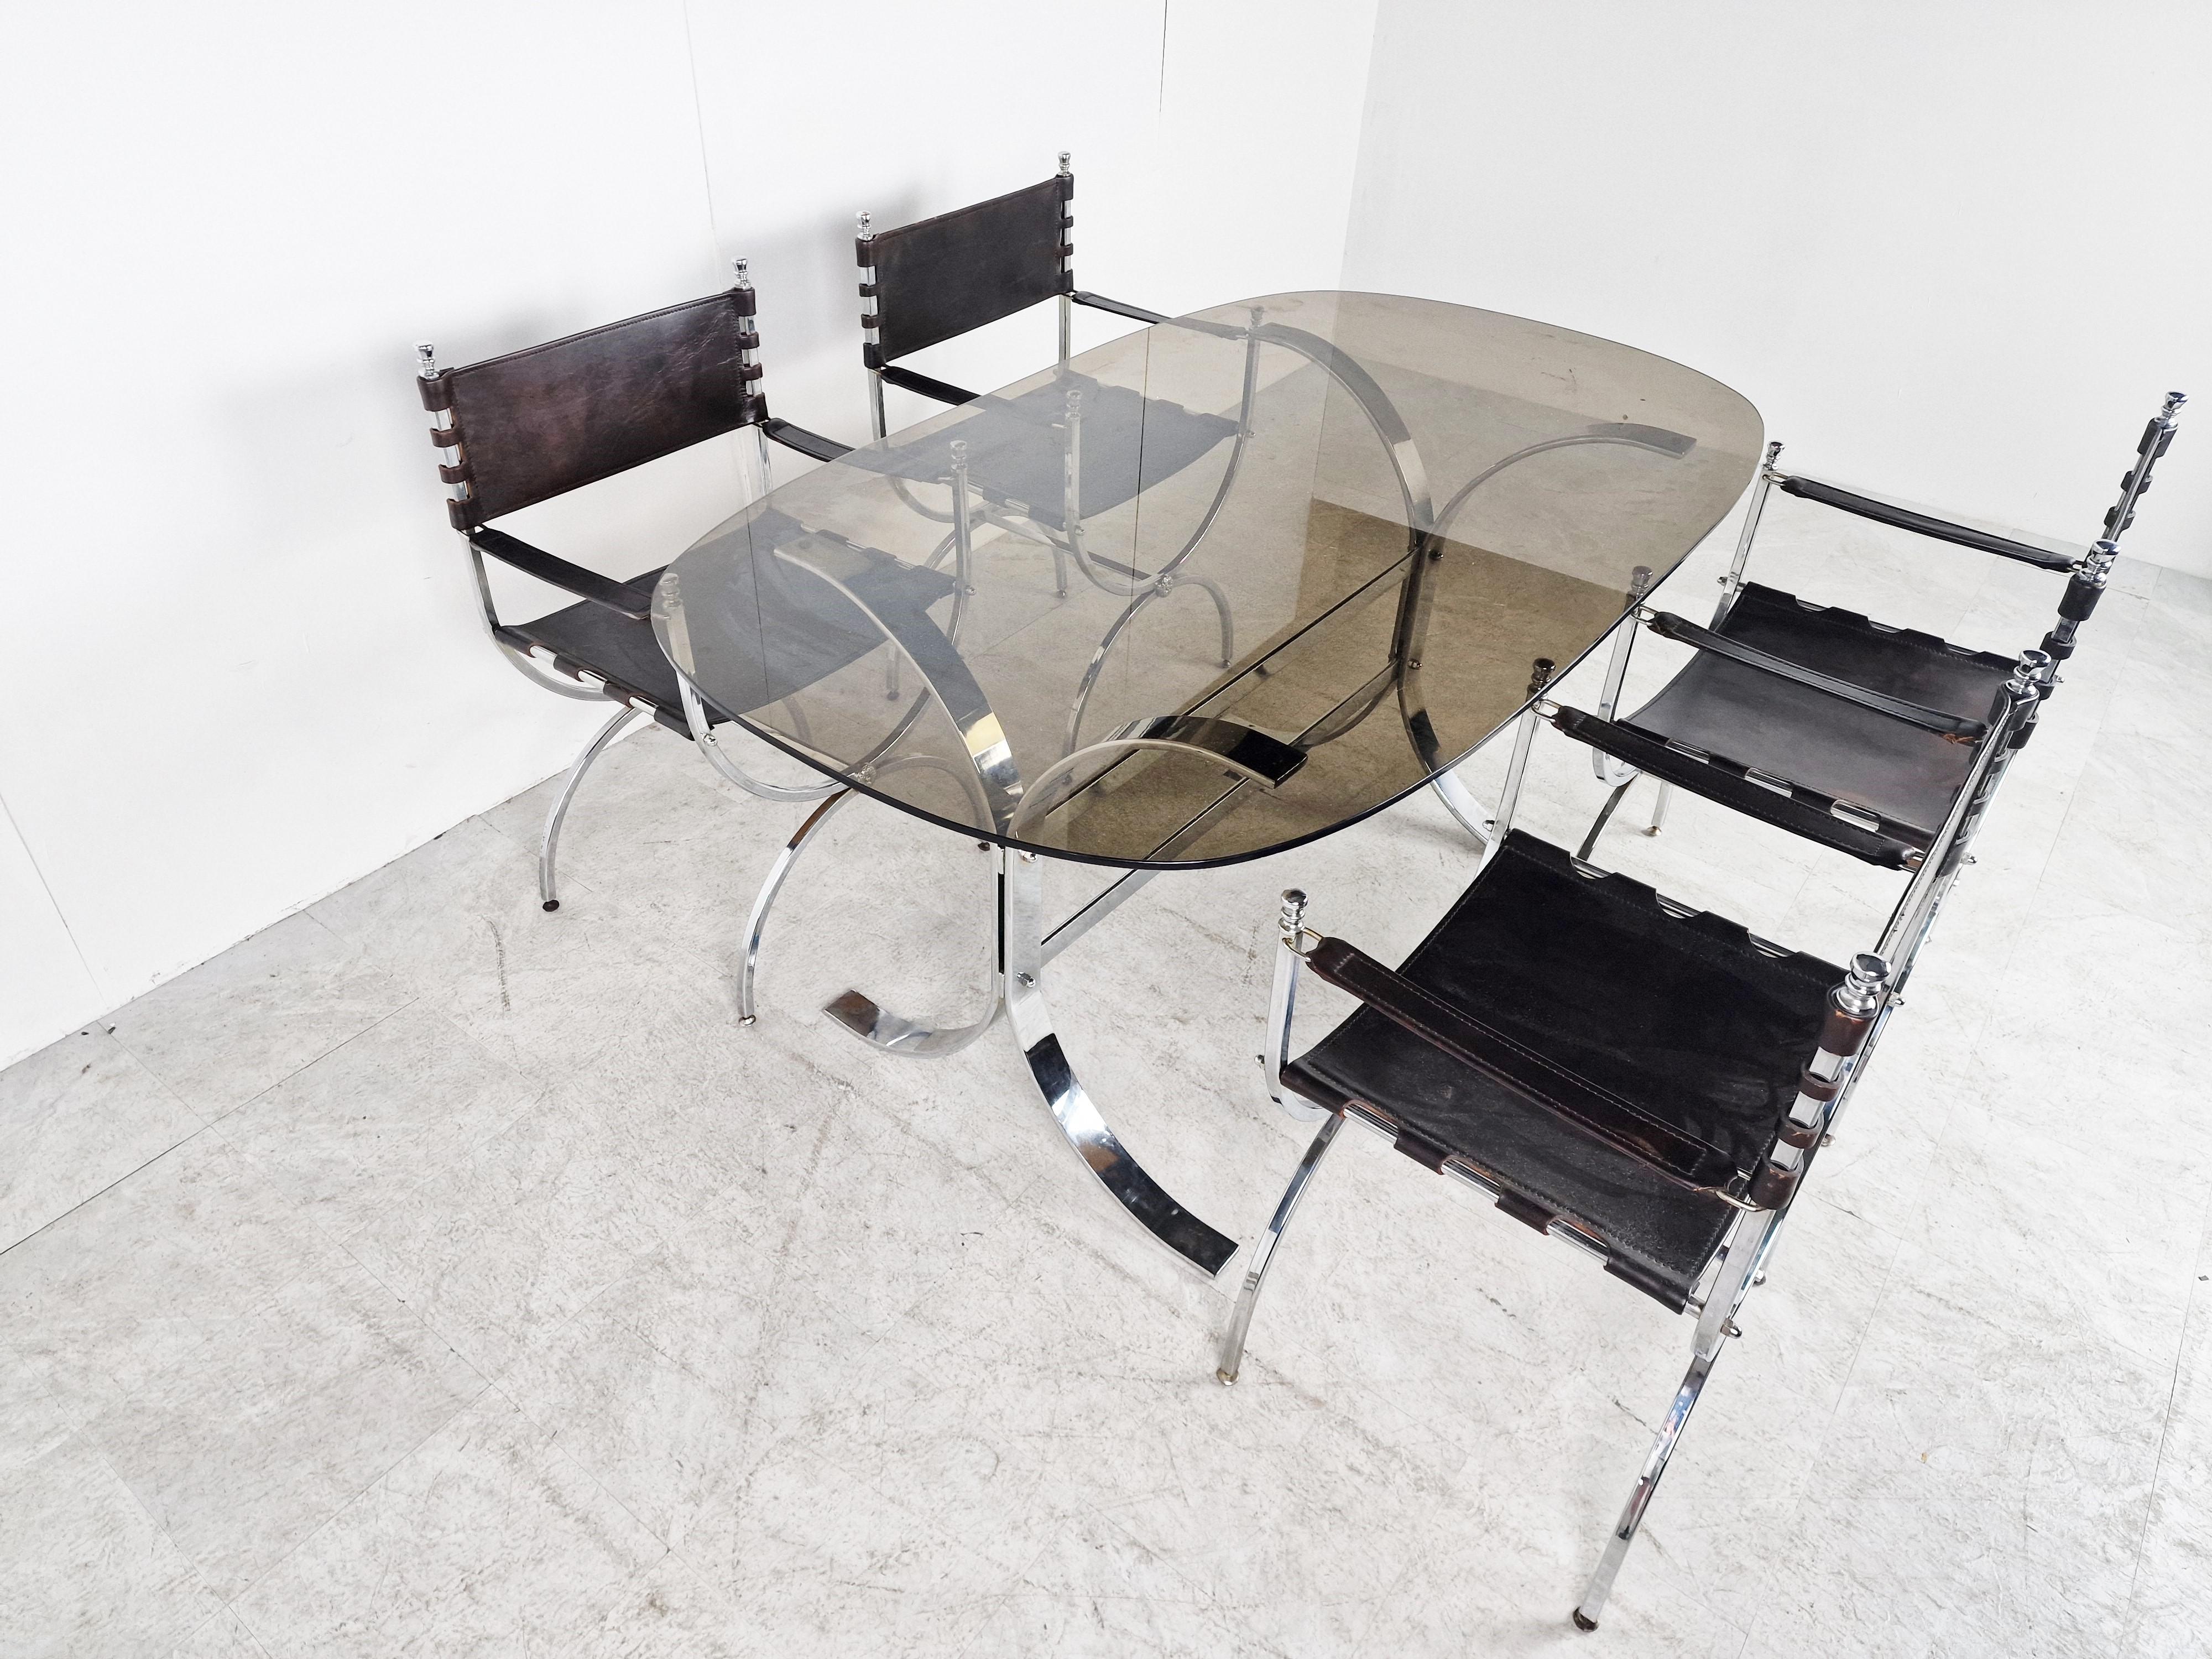 Luxurious dining chairs by Maison Jansen with matching table.

The chairs have a heavy steel frame and strong brown sling leather seats, backrests and armrests.

The table has a chromed steel frame and a smoked glass top.

The chairs are of a